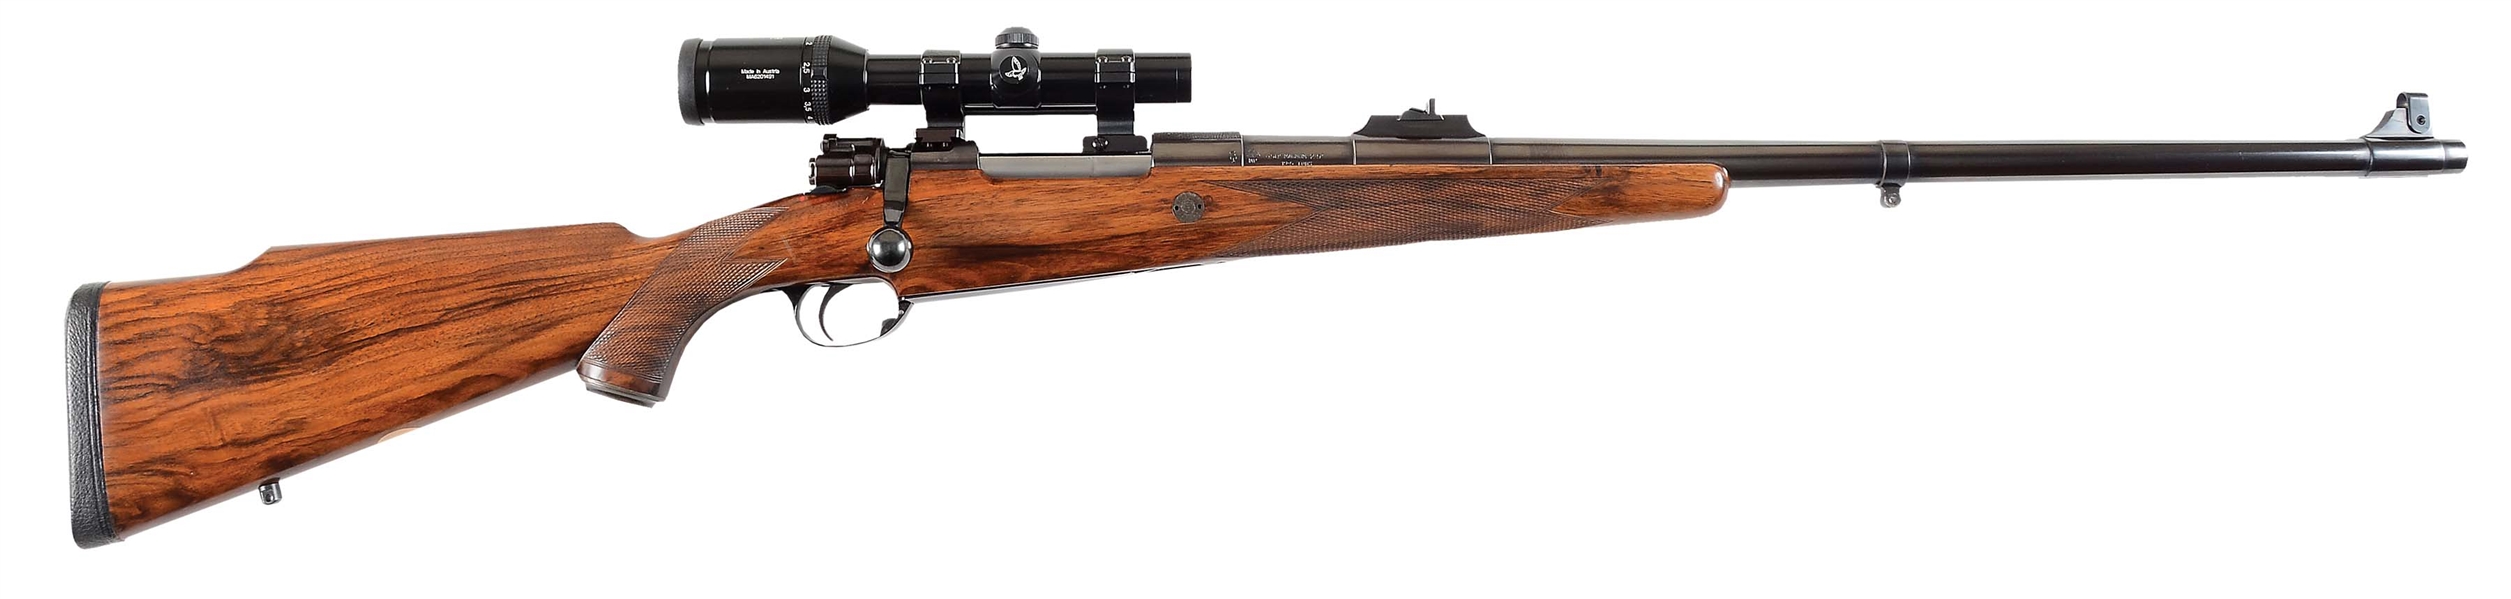 (M) HOLLAND & HOLLAND BOLT ACTION RIFLE WITH SCOPE.